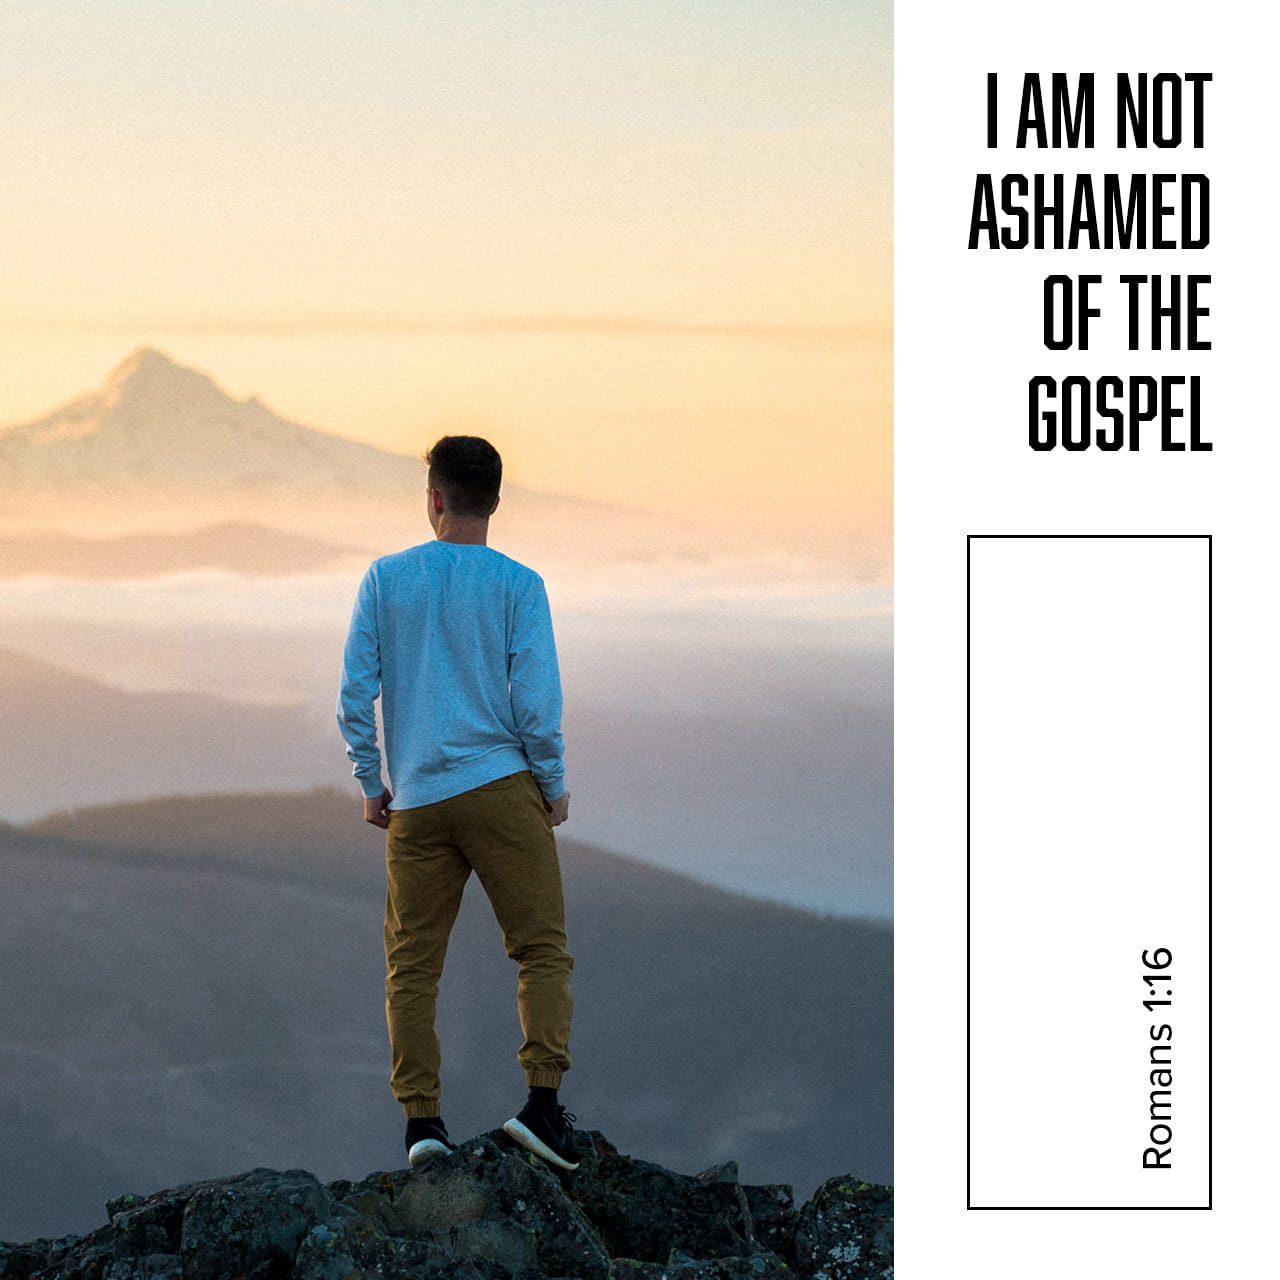 Romans 1:16 For I am not ashamed of the gospel, because it is the power of  God that brings salvation to everyone who believes: first to the Jew, then  to the Gentile. |